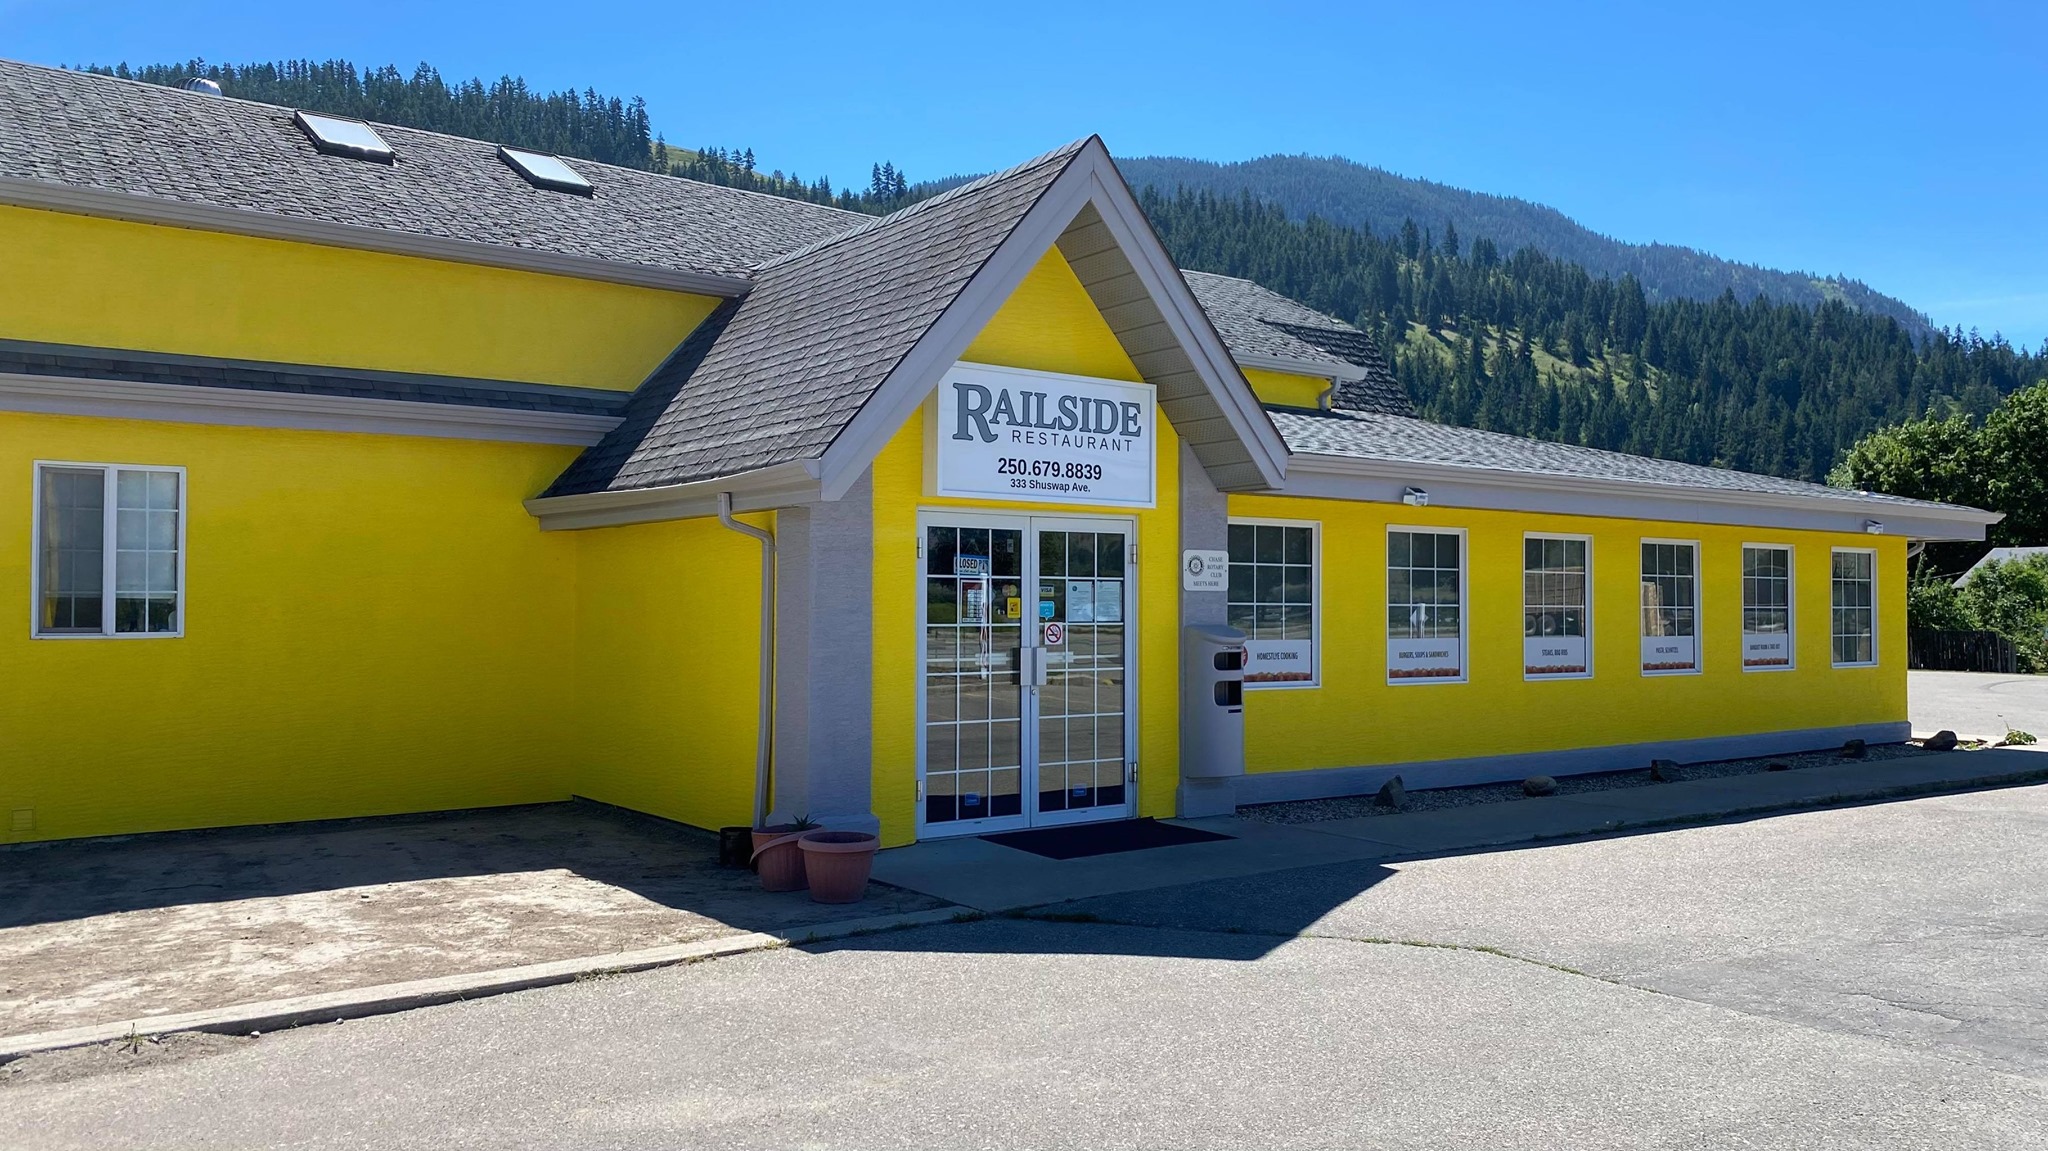 Railside Restaurant: Railside Restaurant is a family style restaurant that offers both dine in and take out. Our menu includes salads, entrees, sandwiches, burgers and more! Come in and see us!